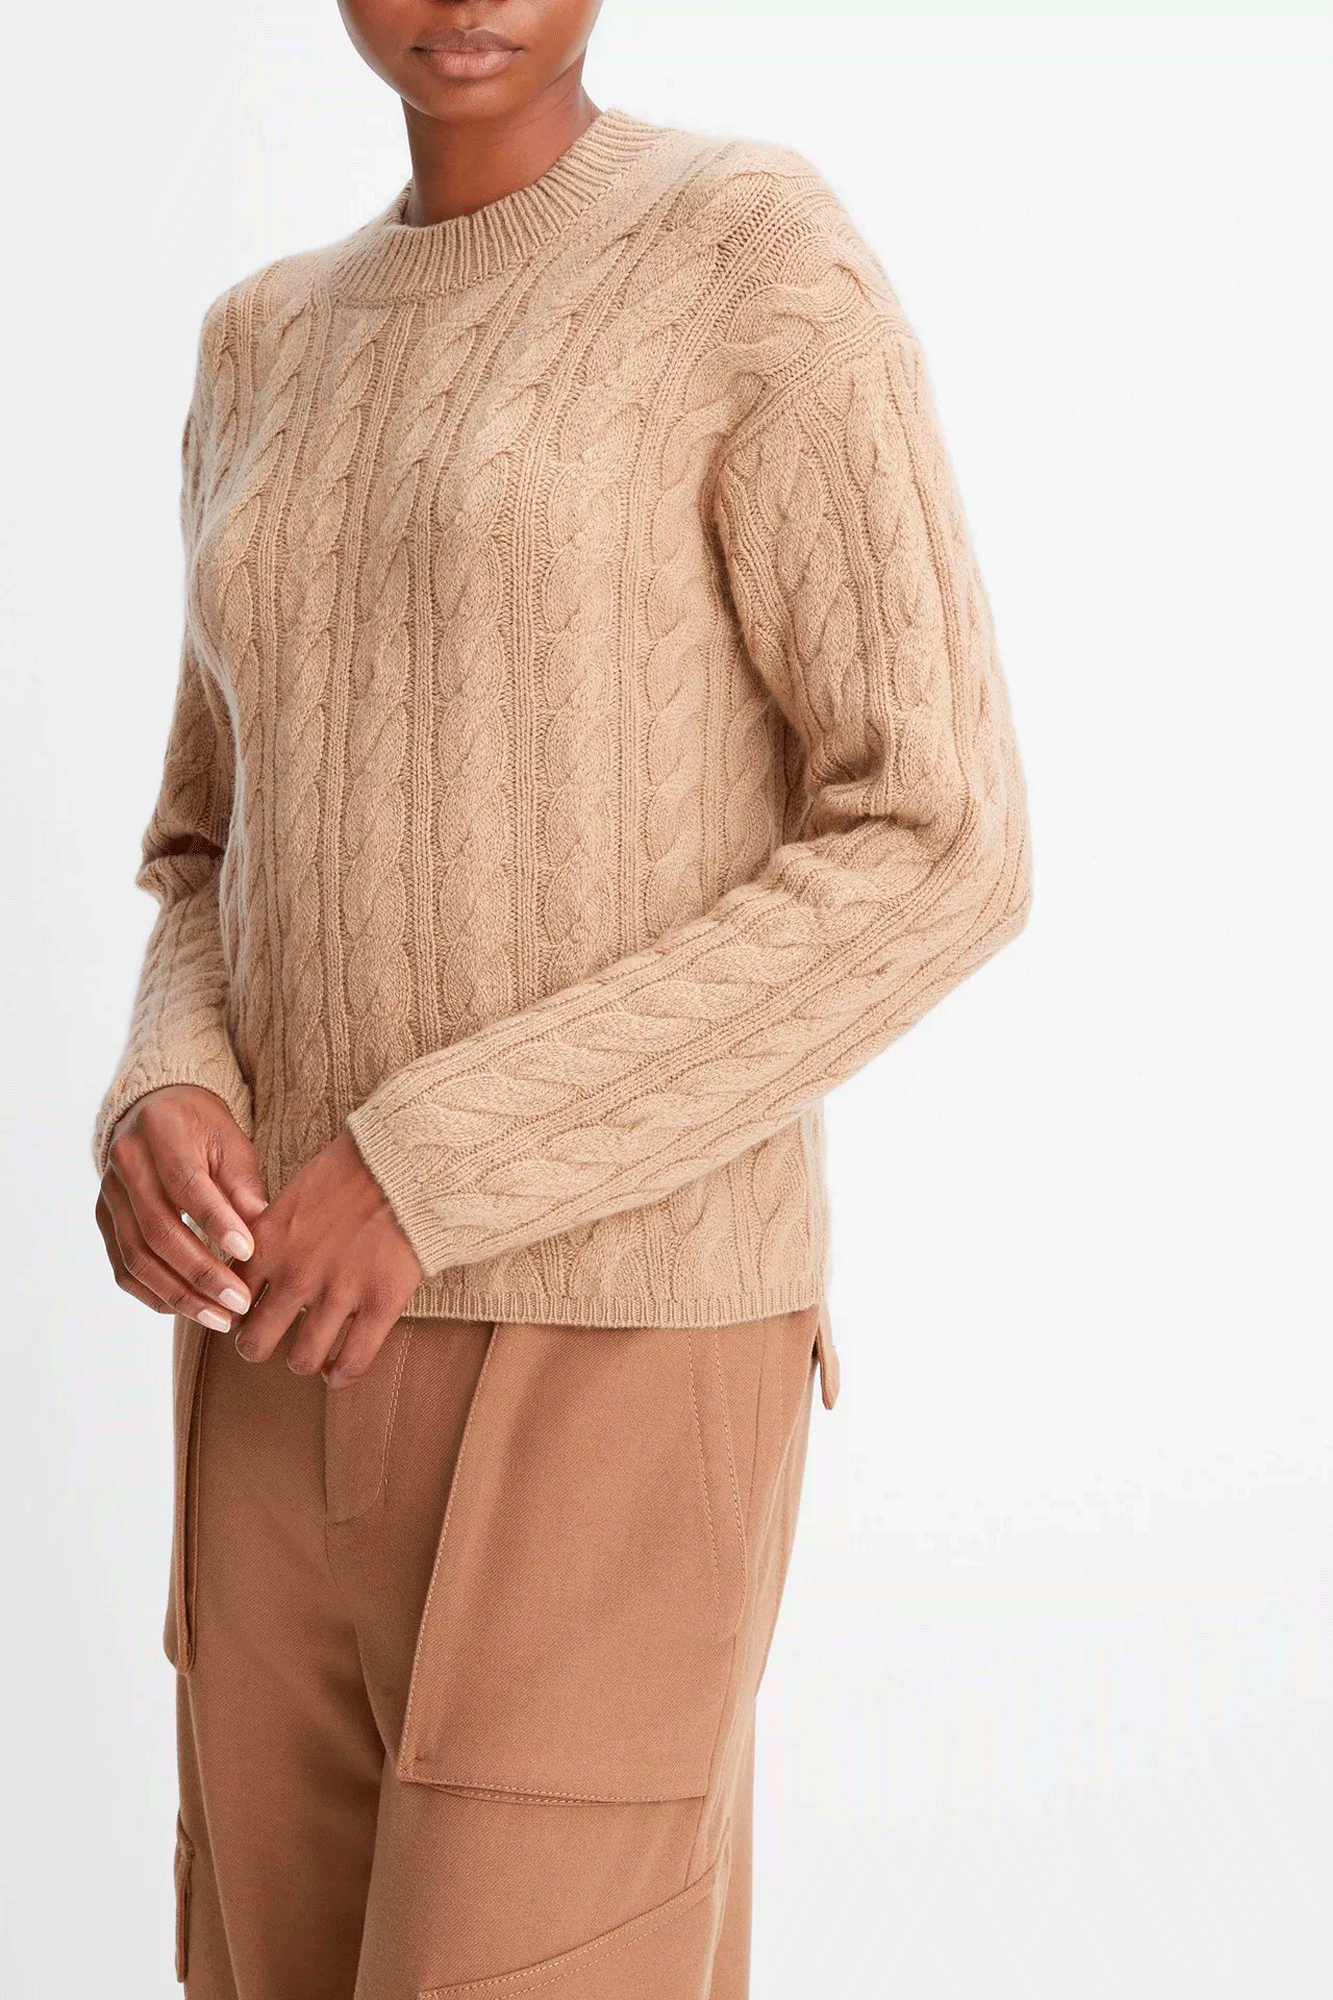 The Twist Cable Crop Crew from Vince is a premium knitted crew neck sweater made from a blend of luxurious wool and cashmere fibers. Its stylish cable pattern creates a flattering silhouette that will keep you cozy and warm. Enjoy superior comfort and style with this sophisticated wardrobe staple.